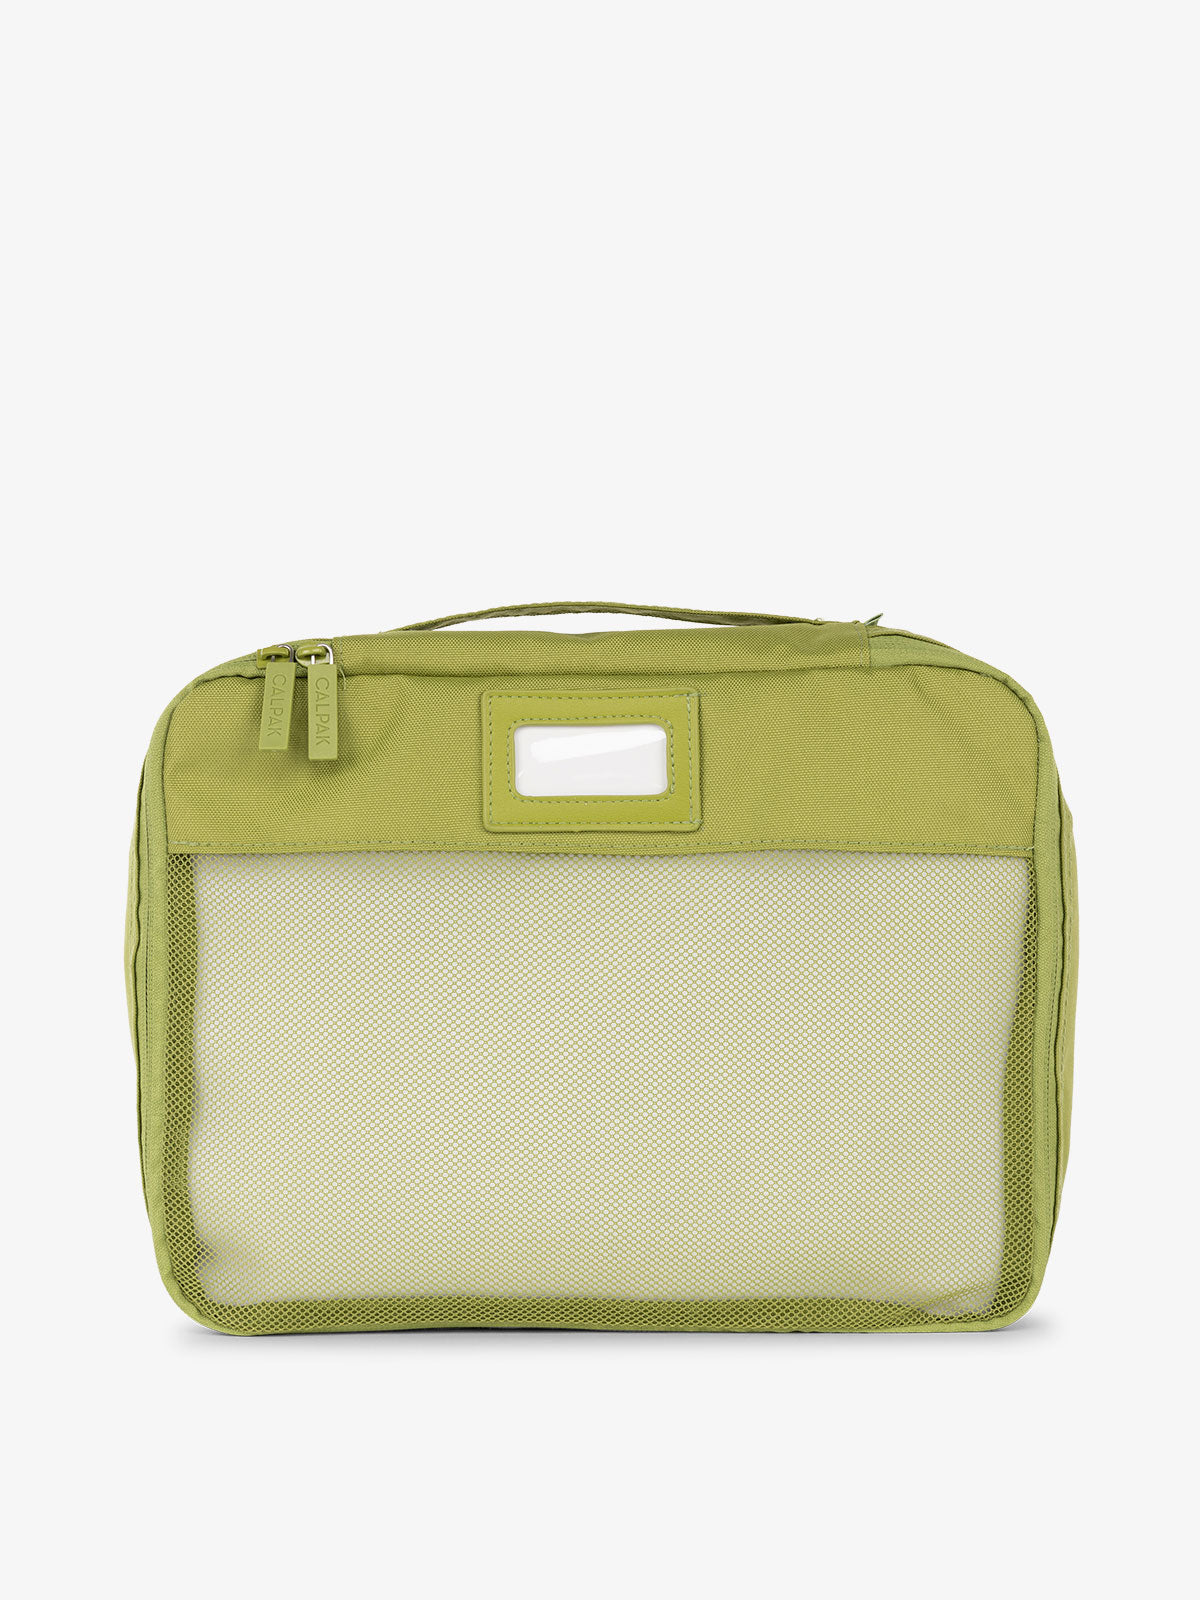 CALPAK luggage packing cubes for clothes with mesh front and label in palm green